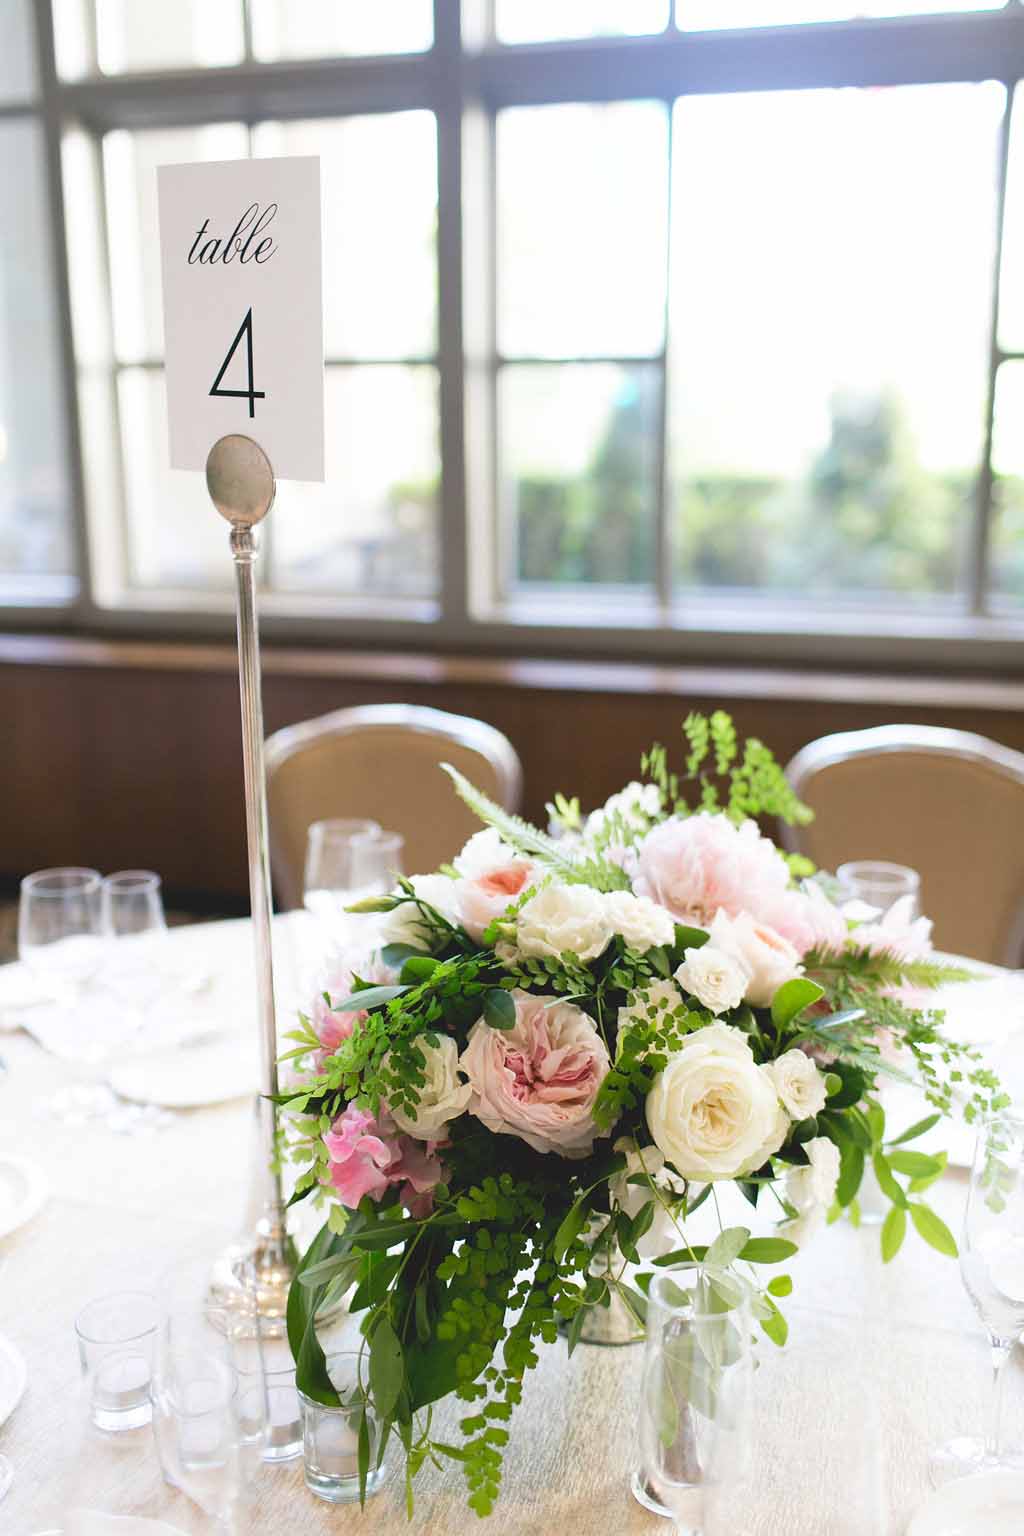 Bella Fiori, Seattle Wedding Florist, Fairmont Olympic Hotel - Garden Room Reception with peach and blush floral centerpieces - peonies, ranunculus, garden roses